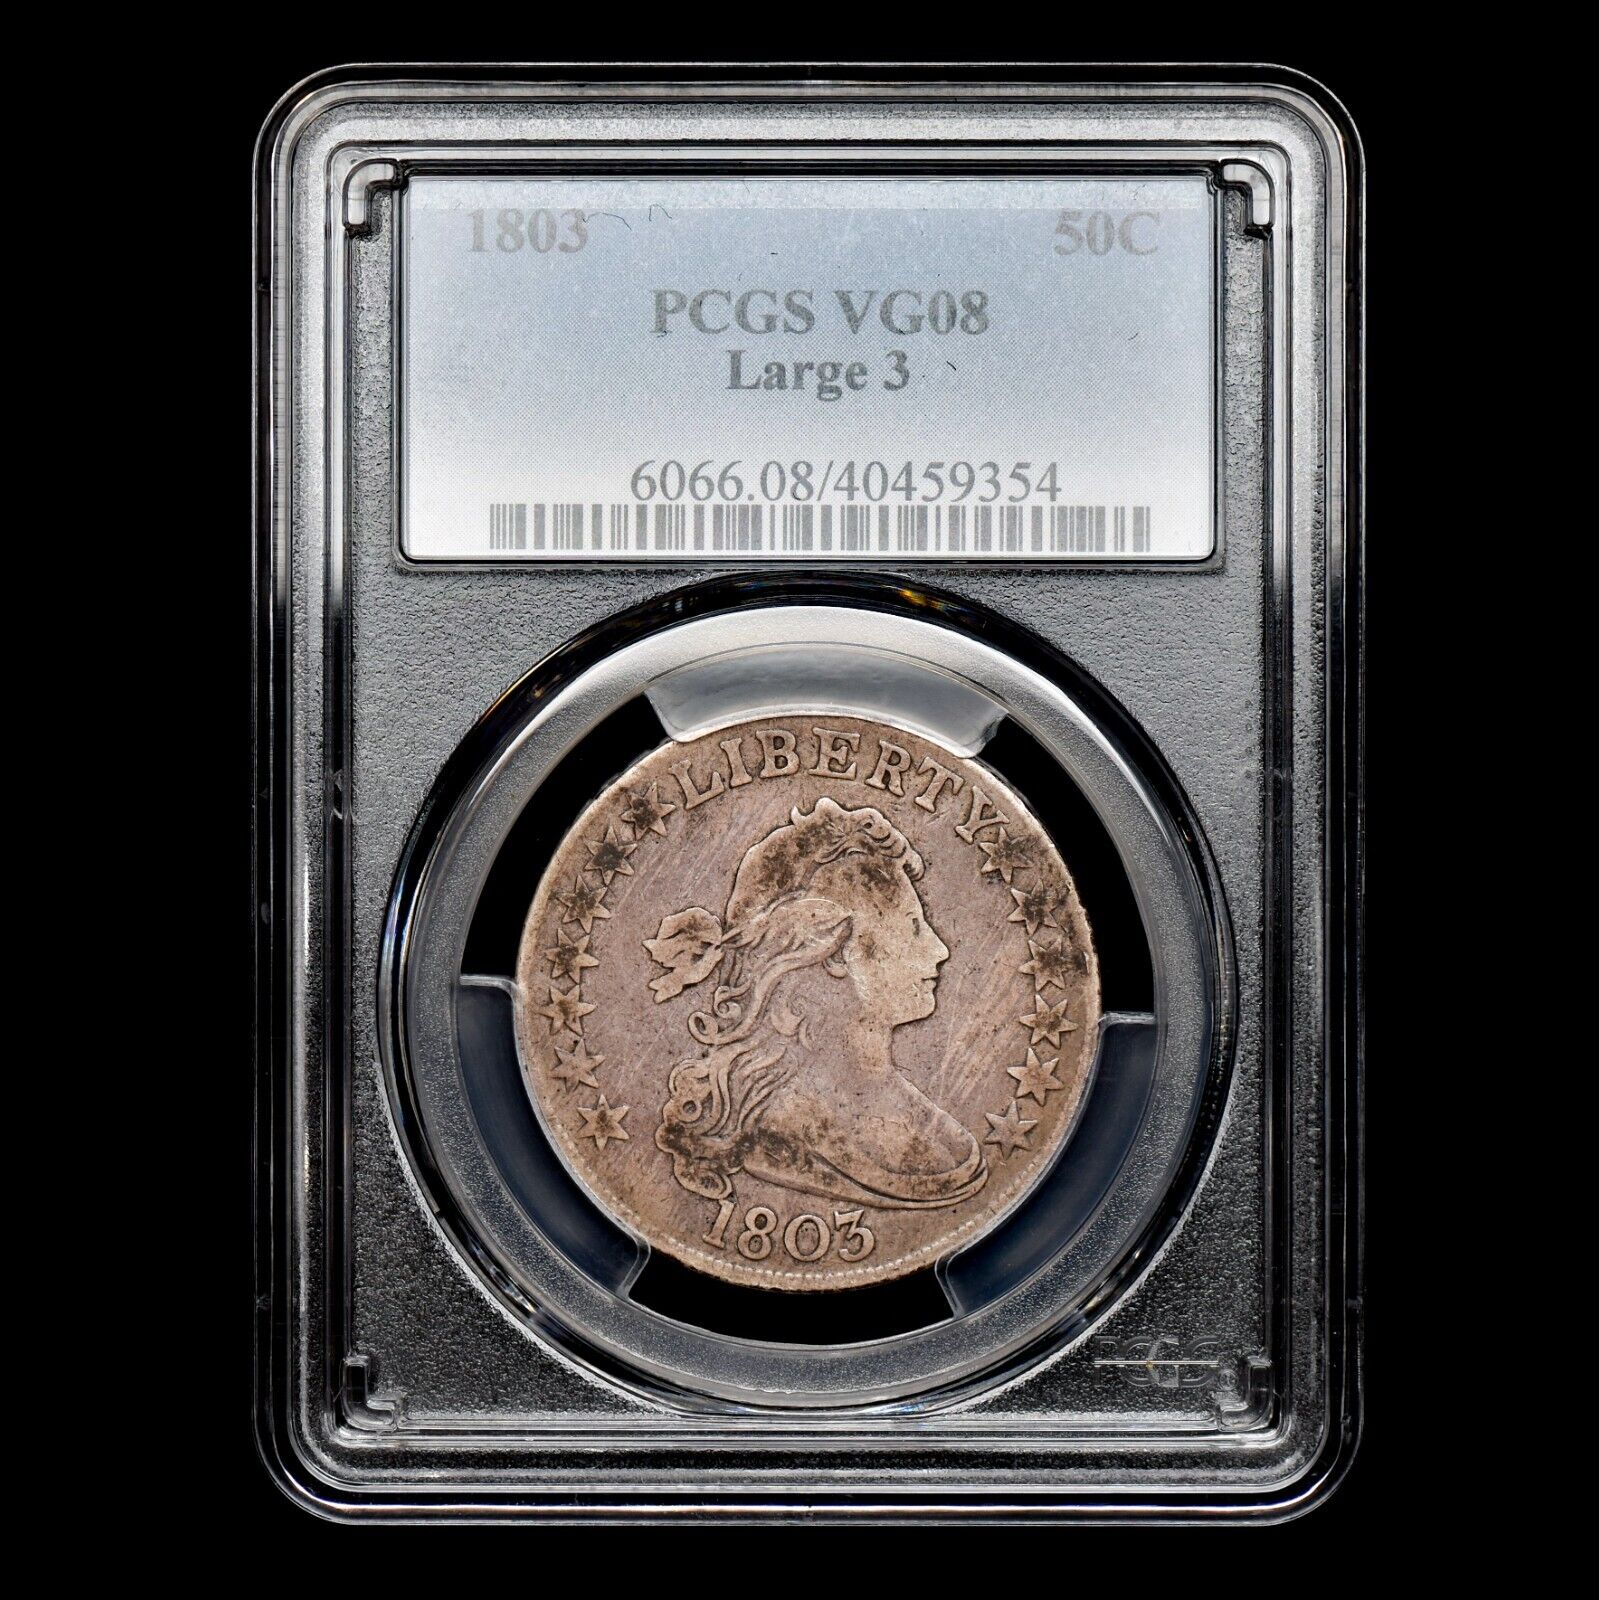 1803 Draped Bust Half Dollar ✪ Pcgs Vg-08 ✪ 50c Silver Large 3 8 Coin ◢trusted◣